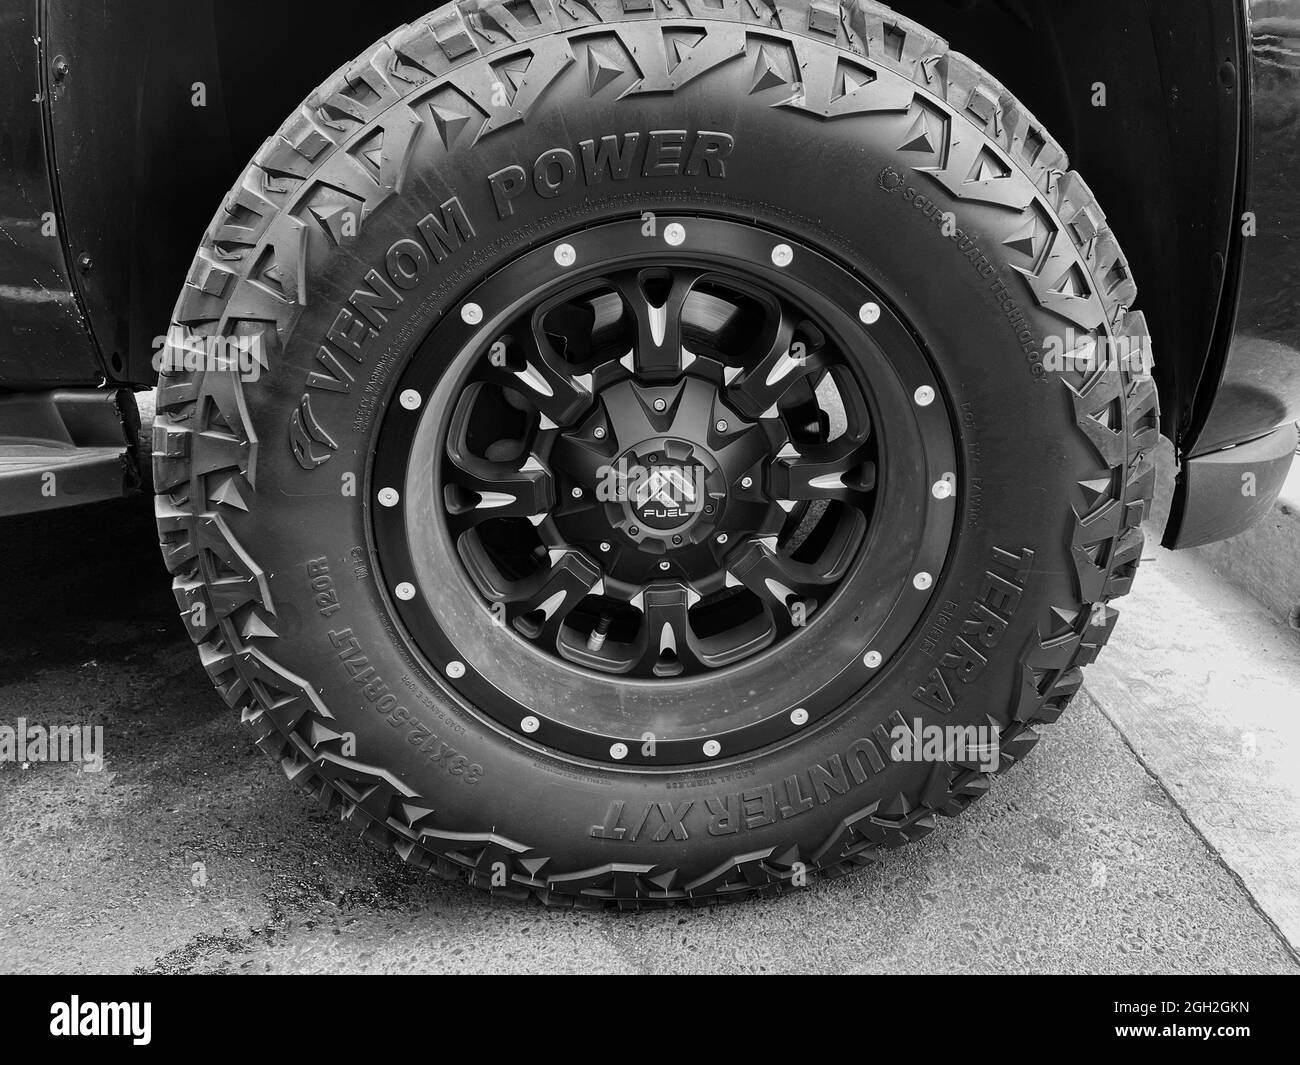 FRESNO, UNITED STATES - Aug 15, 2021: A closeup of a Venom Power tire with black custom rims on a truck Stock Photo